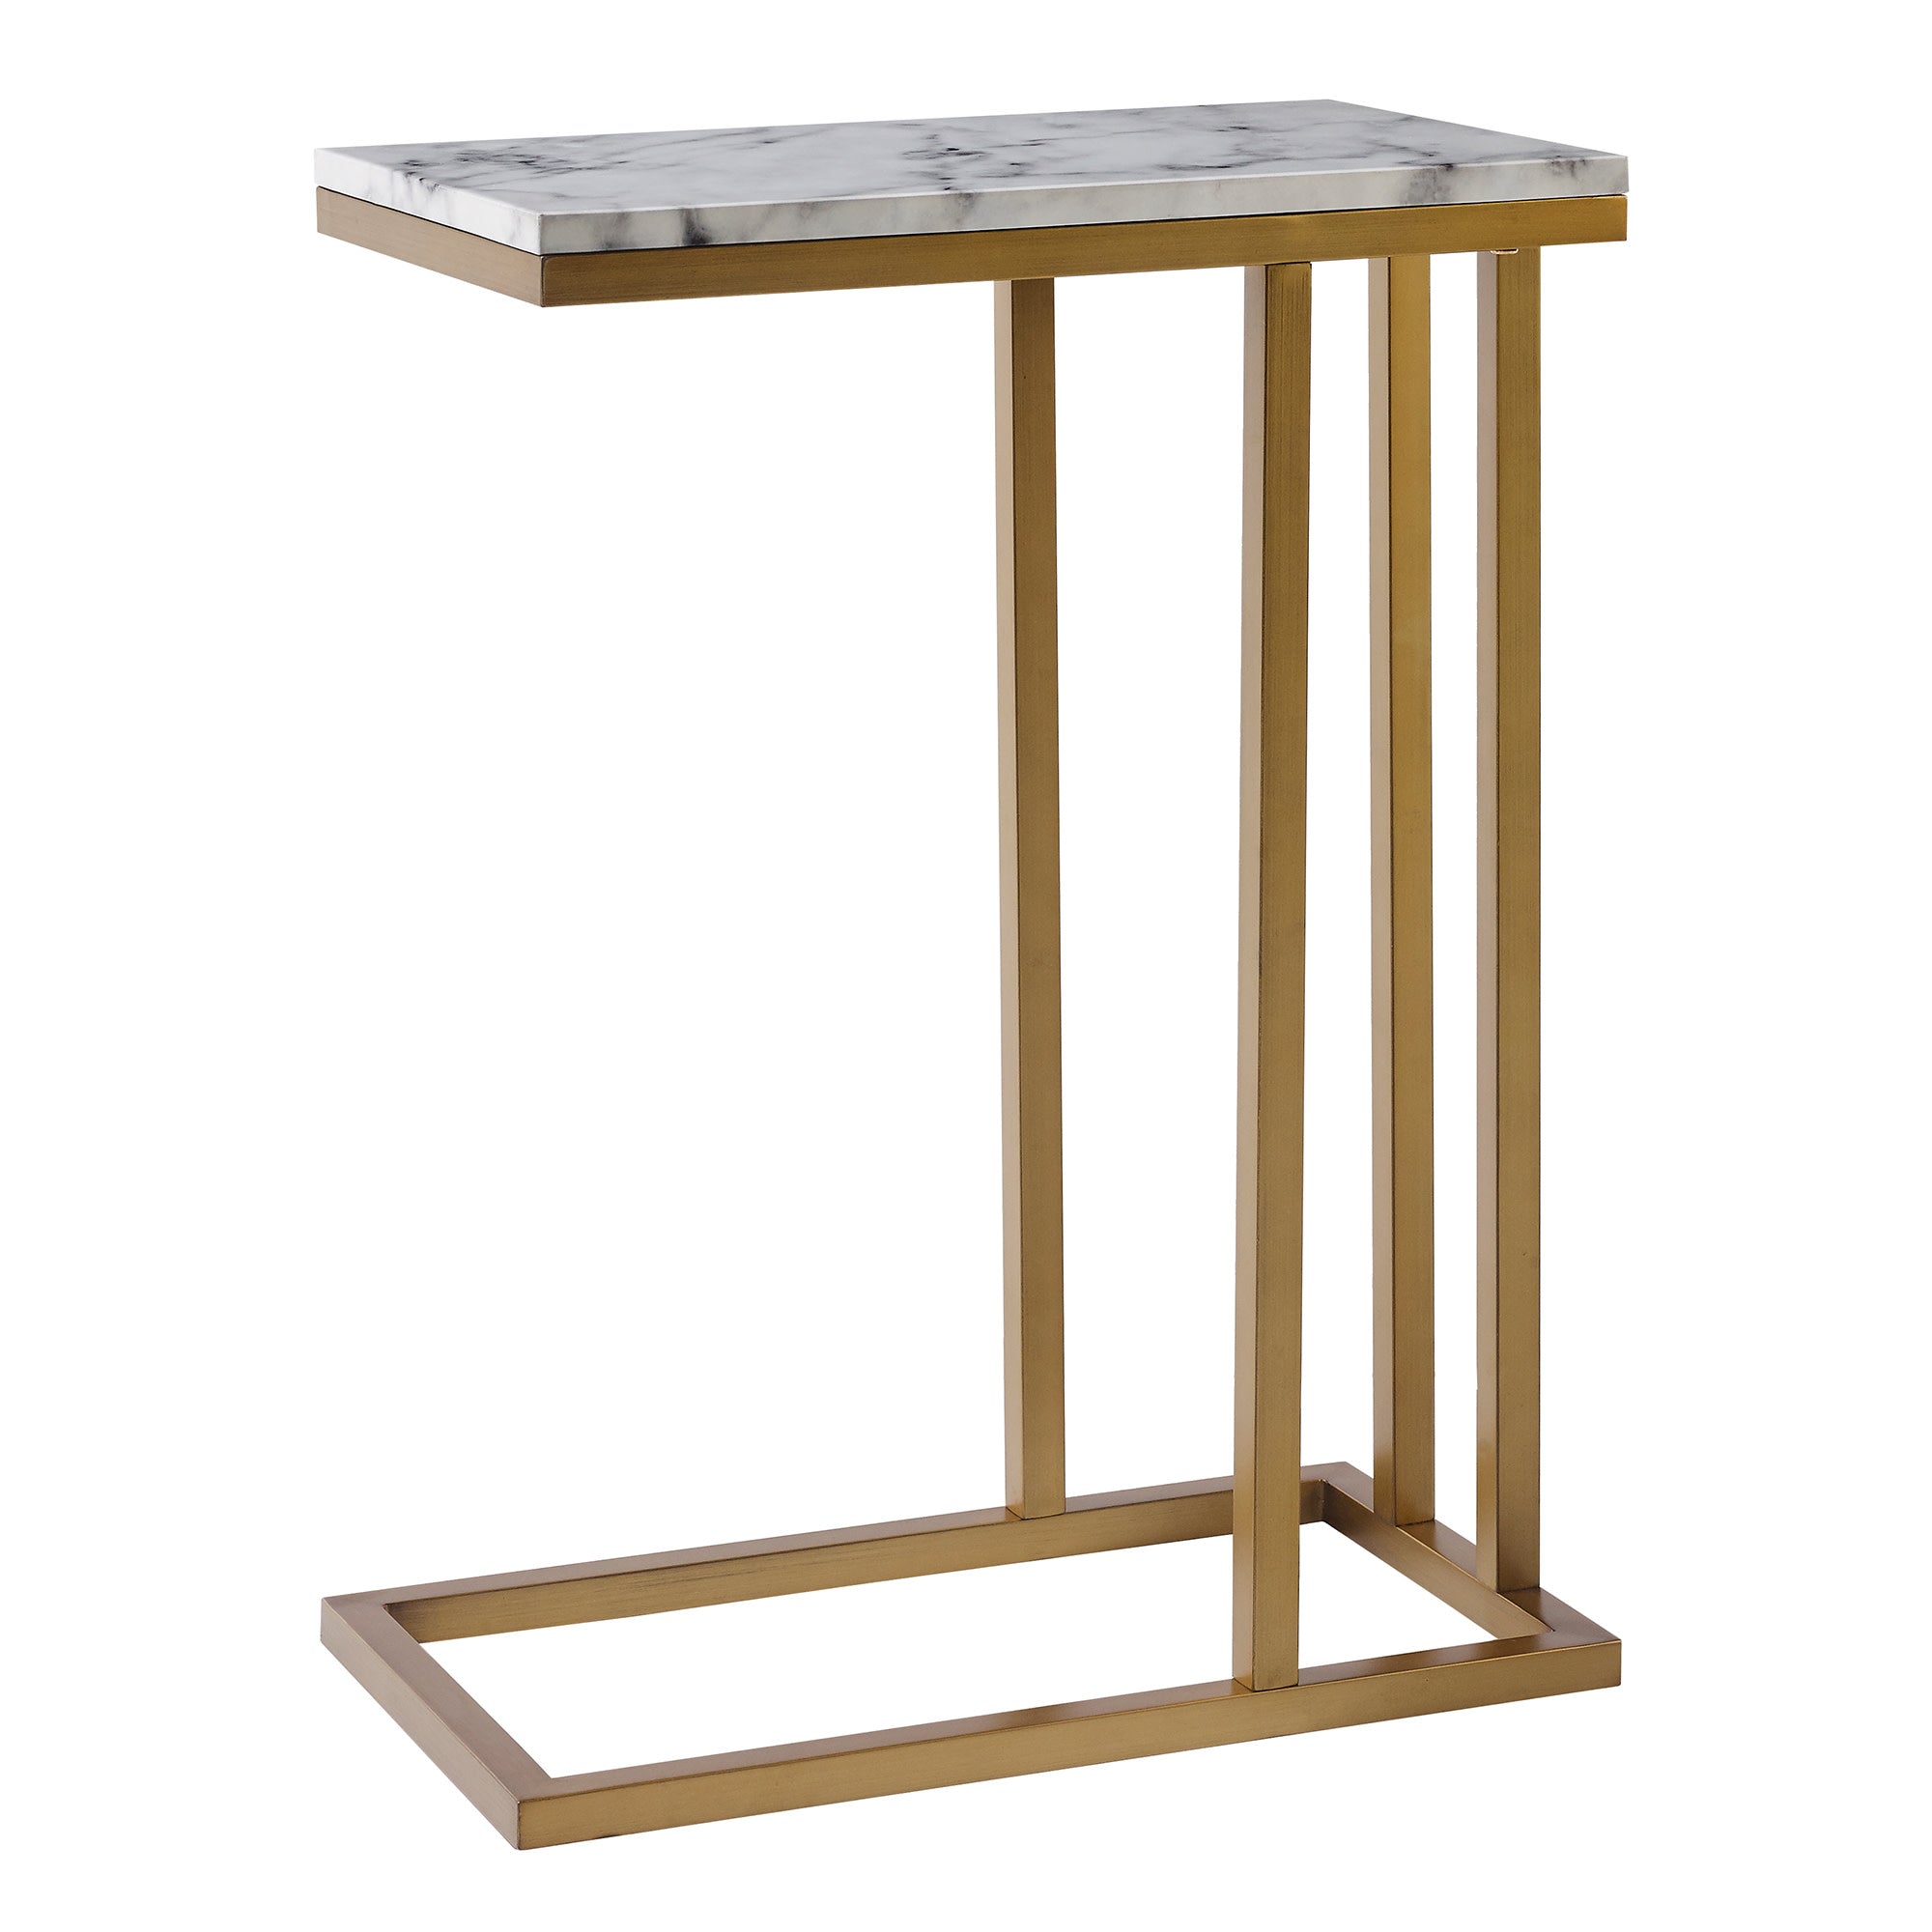 Teamson Home Marmo Modern Marble-Look C Shape Side Table, Marble/Brass